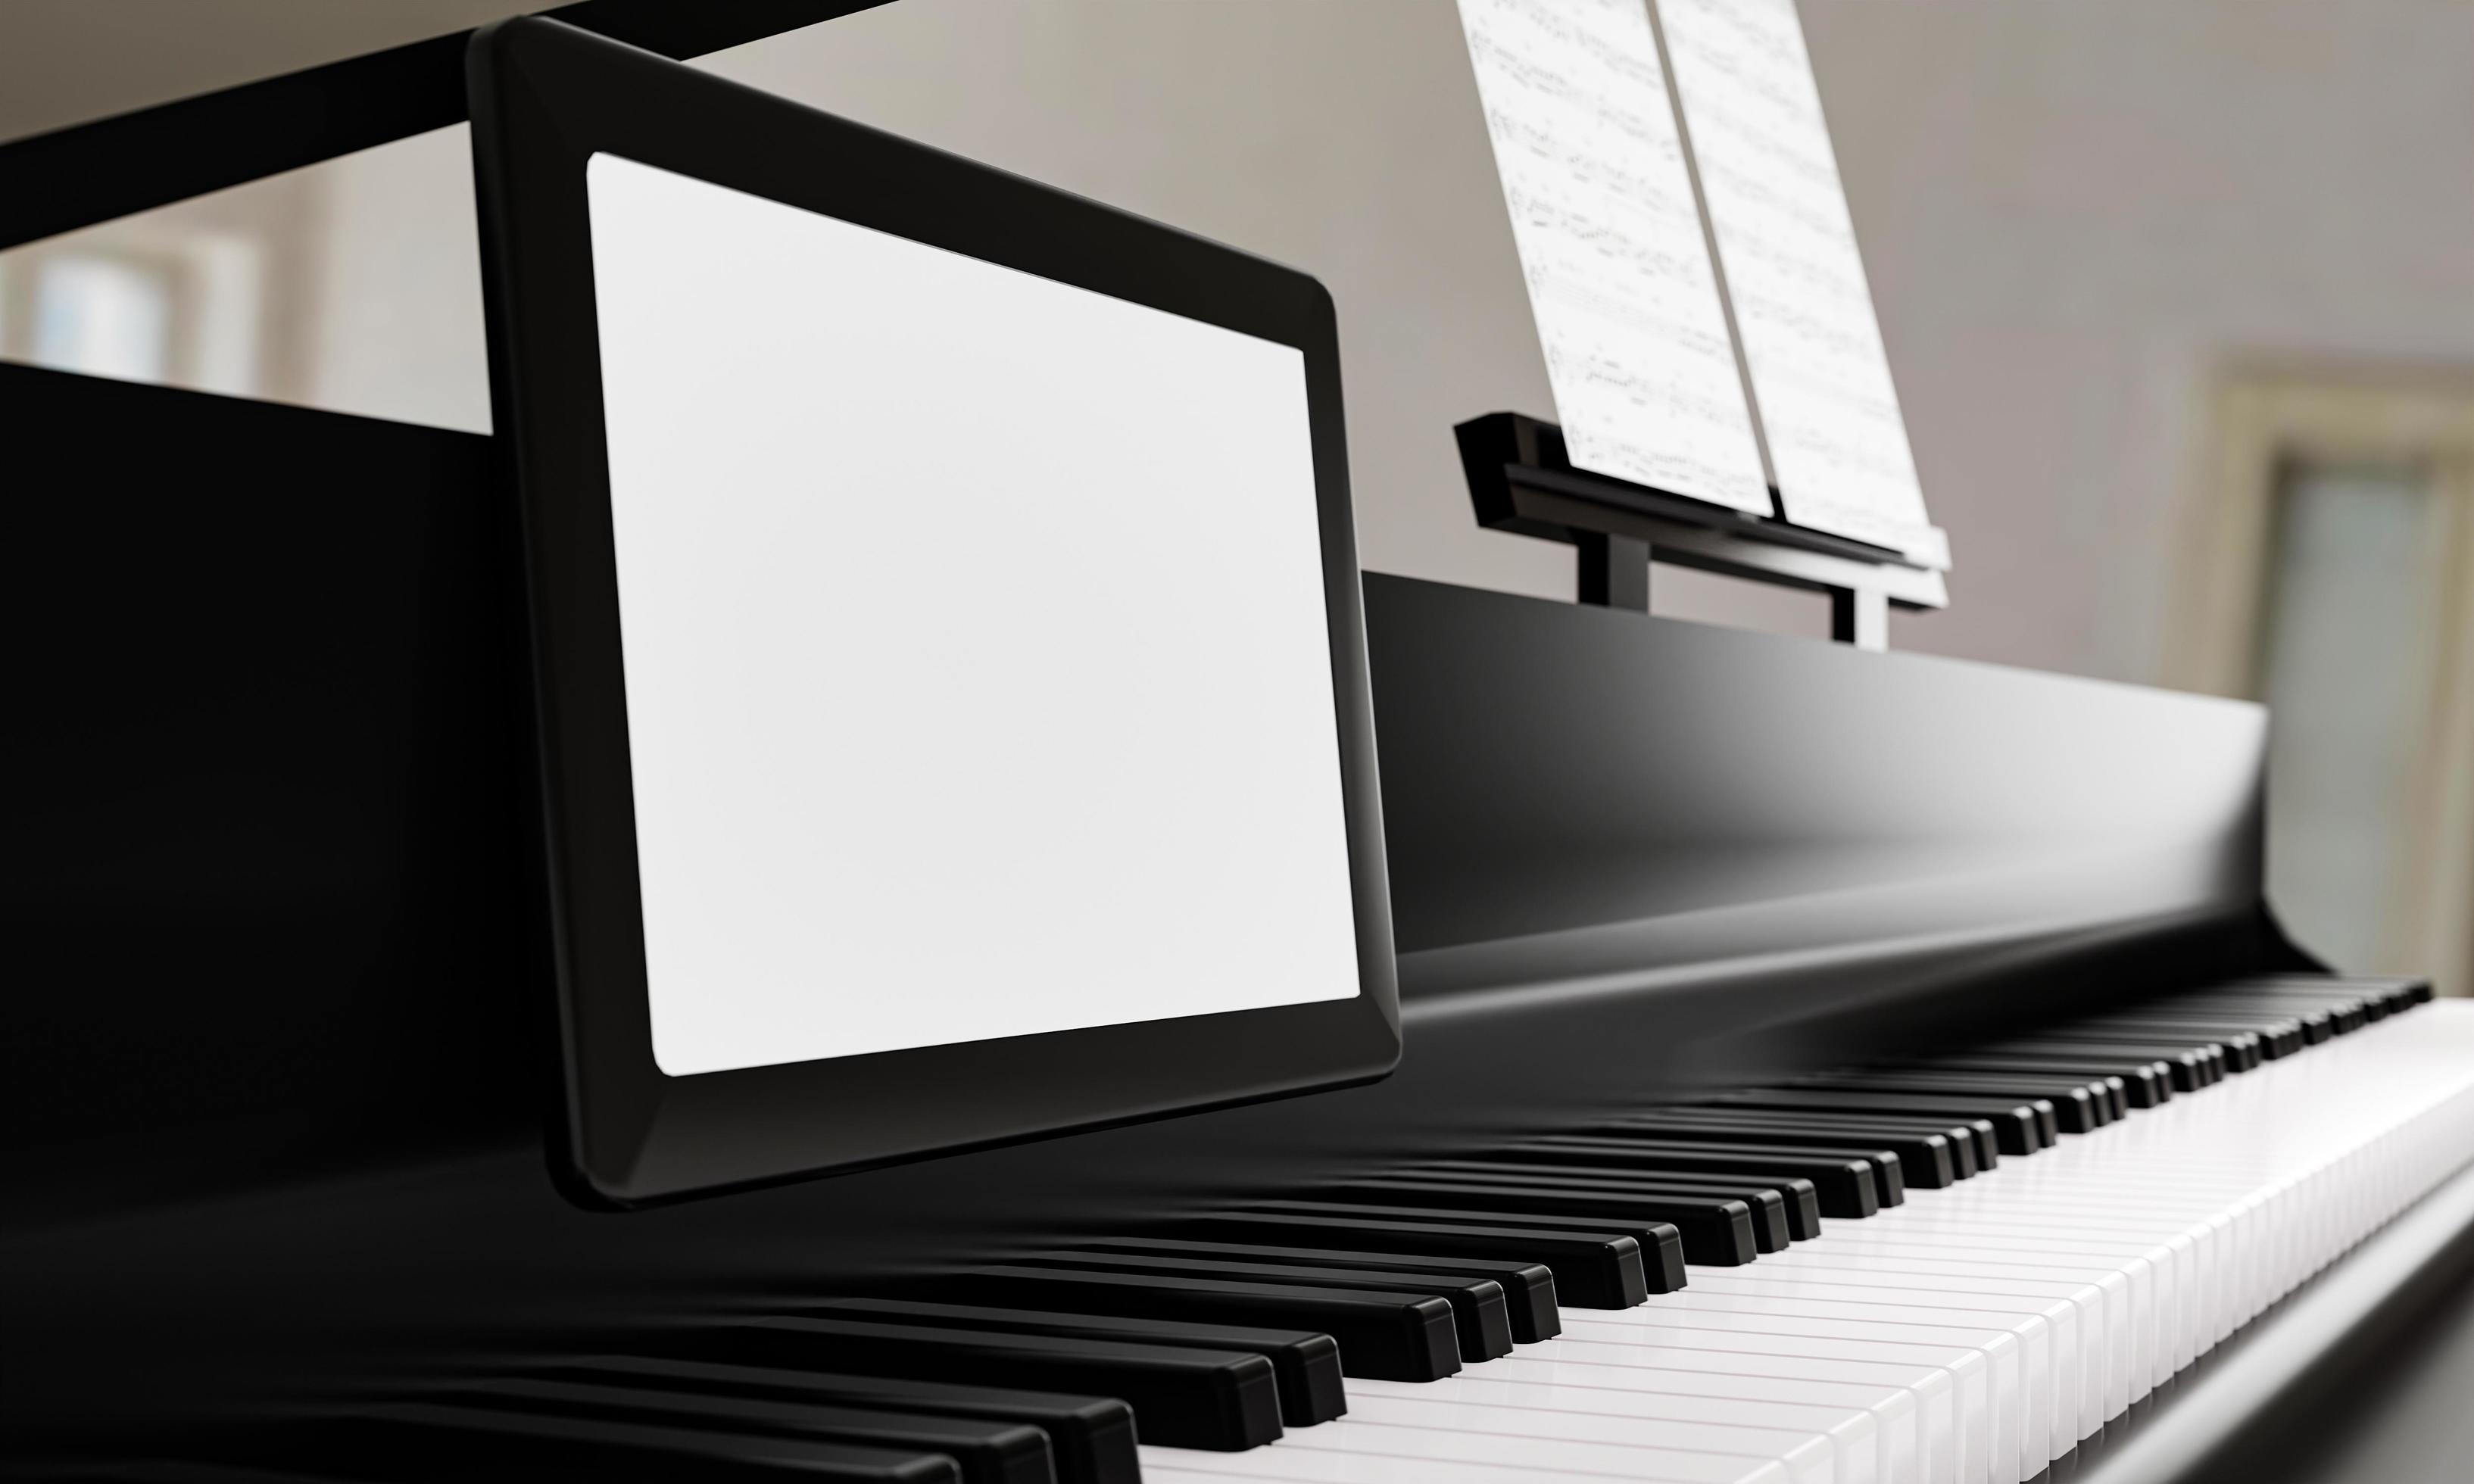 Learn piano online by yourself. Use a tablet or computer to learn piano  tutorials online. The black grand piano has a tablet placed on a notebook  stand. 3D Rendering. 6661781 Stock Photo